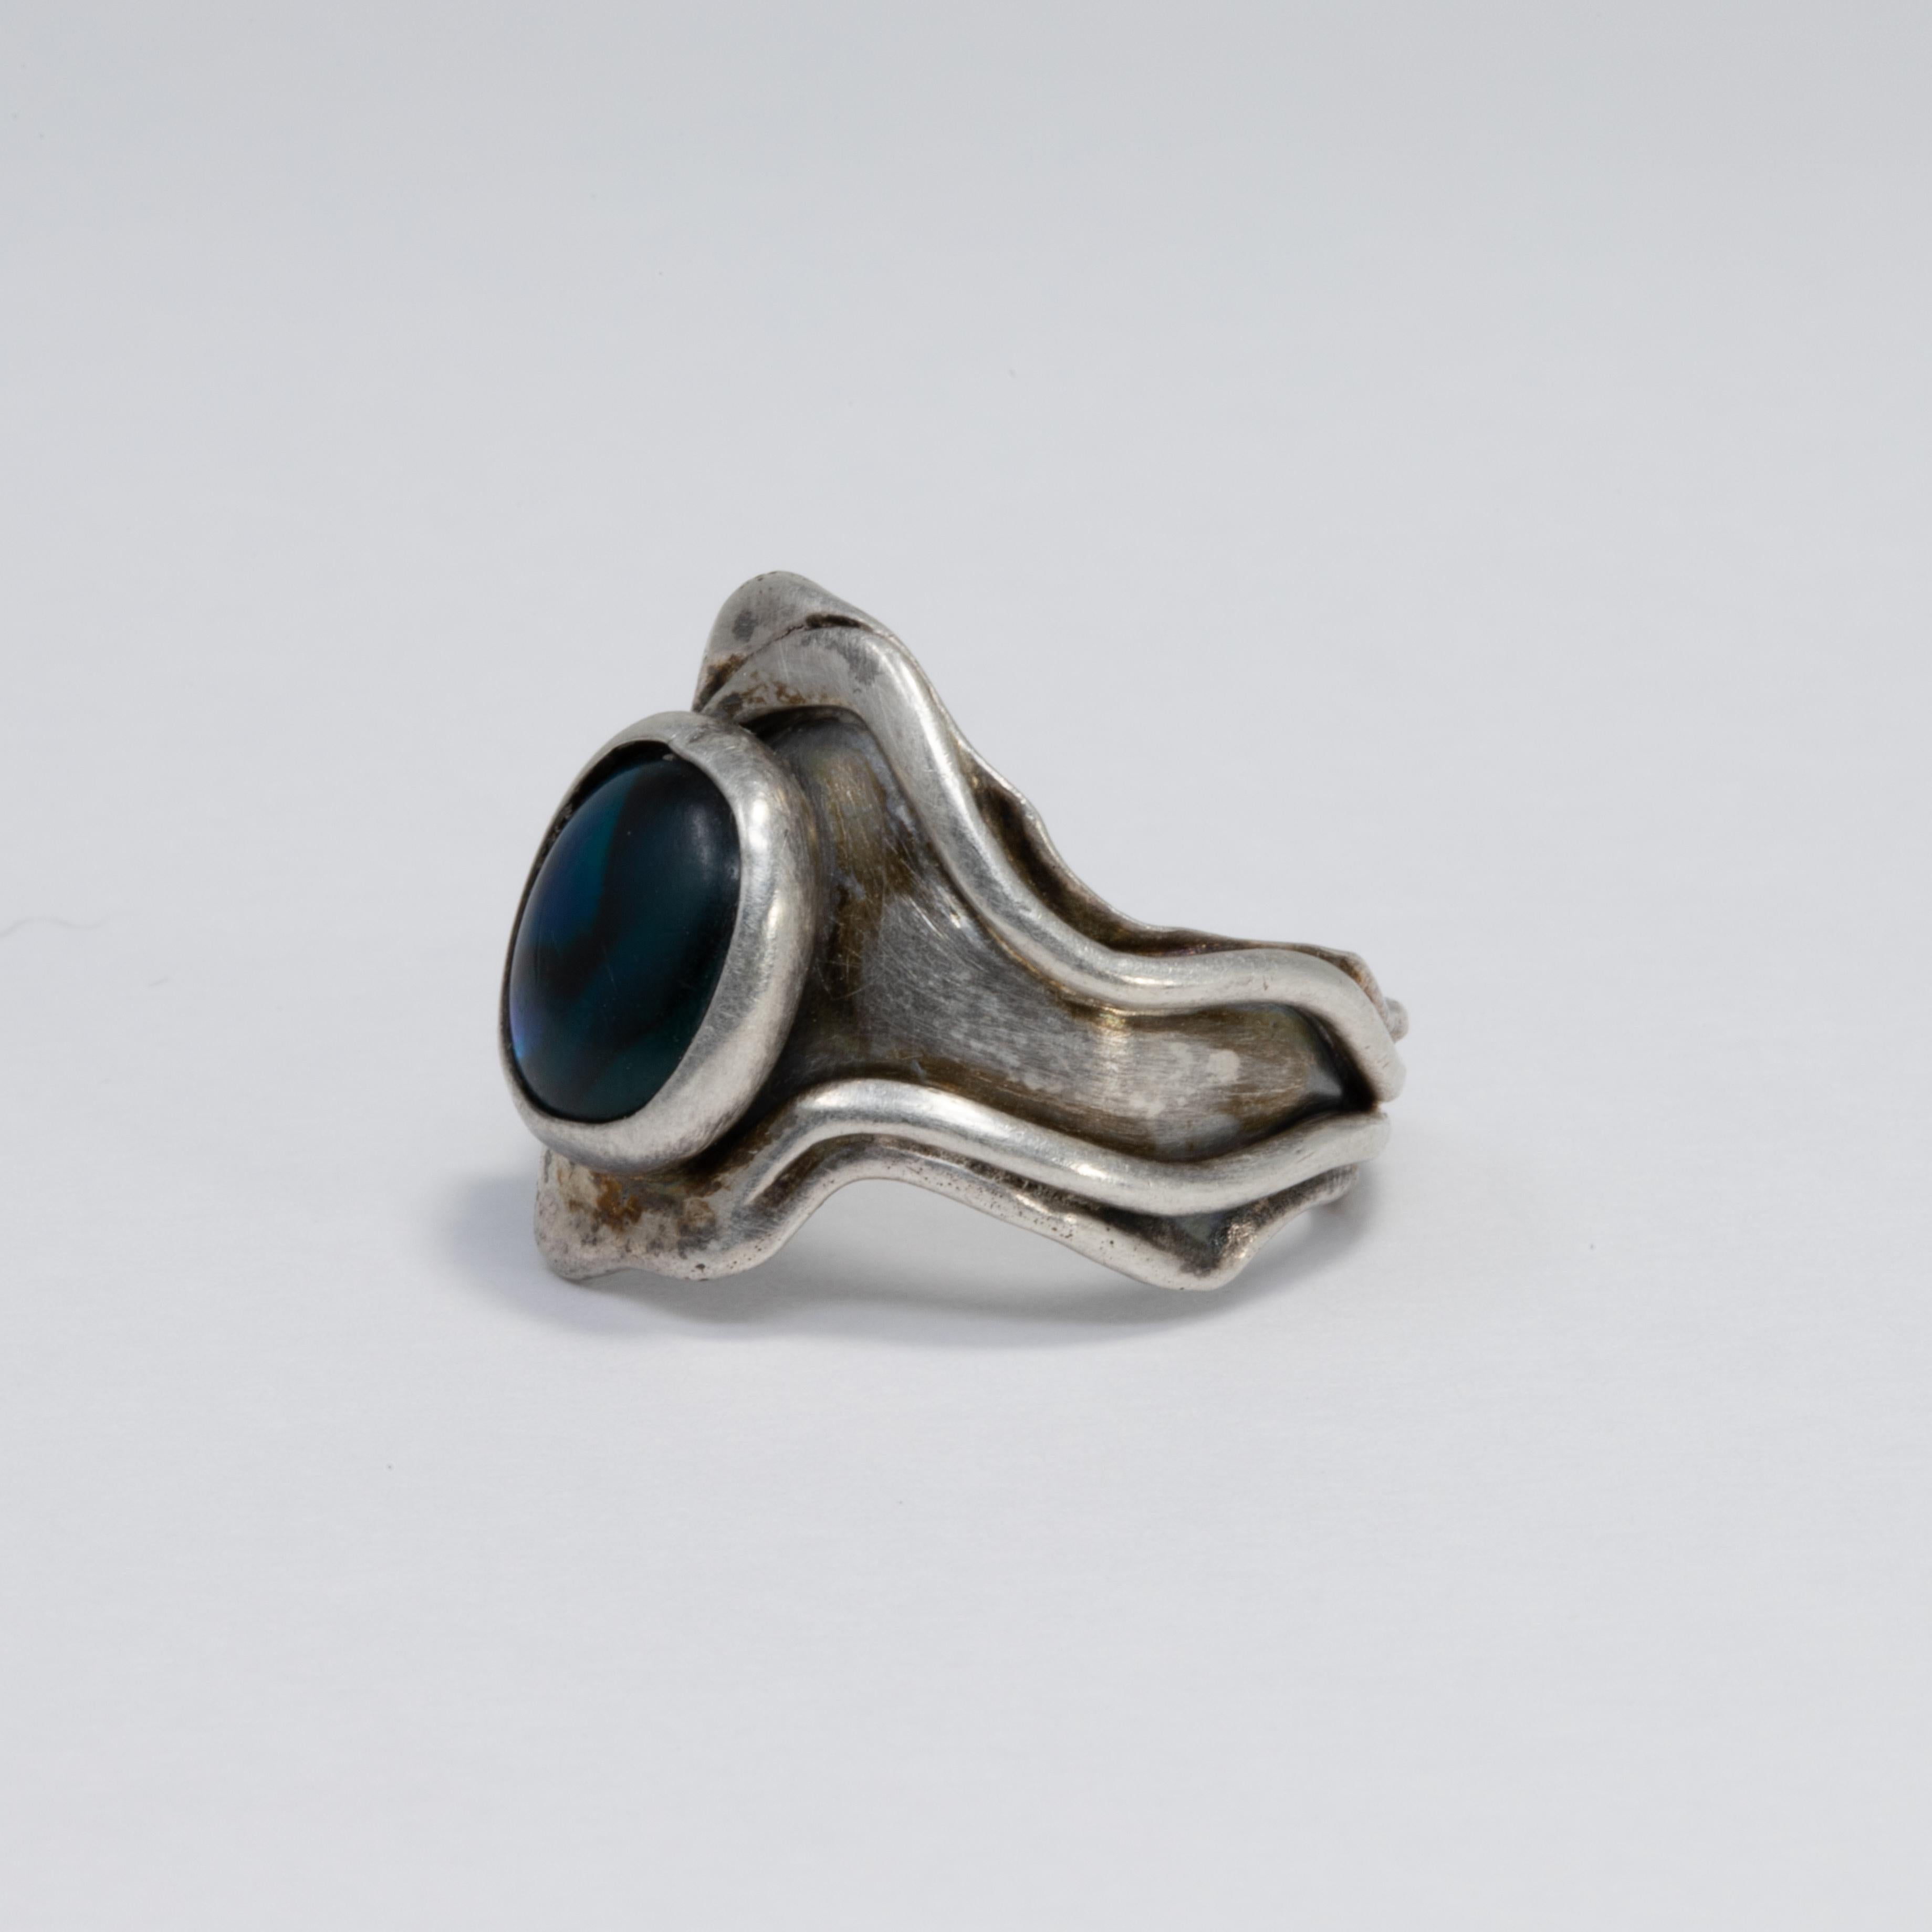 A gorgeous Native American sterling silver ring, with a mesmerizing blue and green gemstone centerpiece. Hand-made by skilled Zuni craftsmen.

Ring Size US 7

Statement/cocktail style.

Marks / hallmarks / etc: TJM, STER